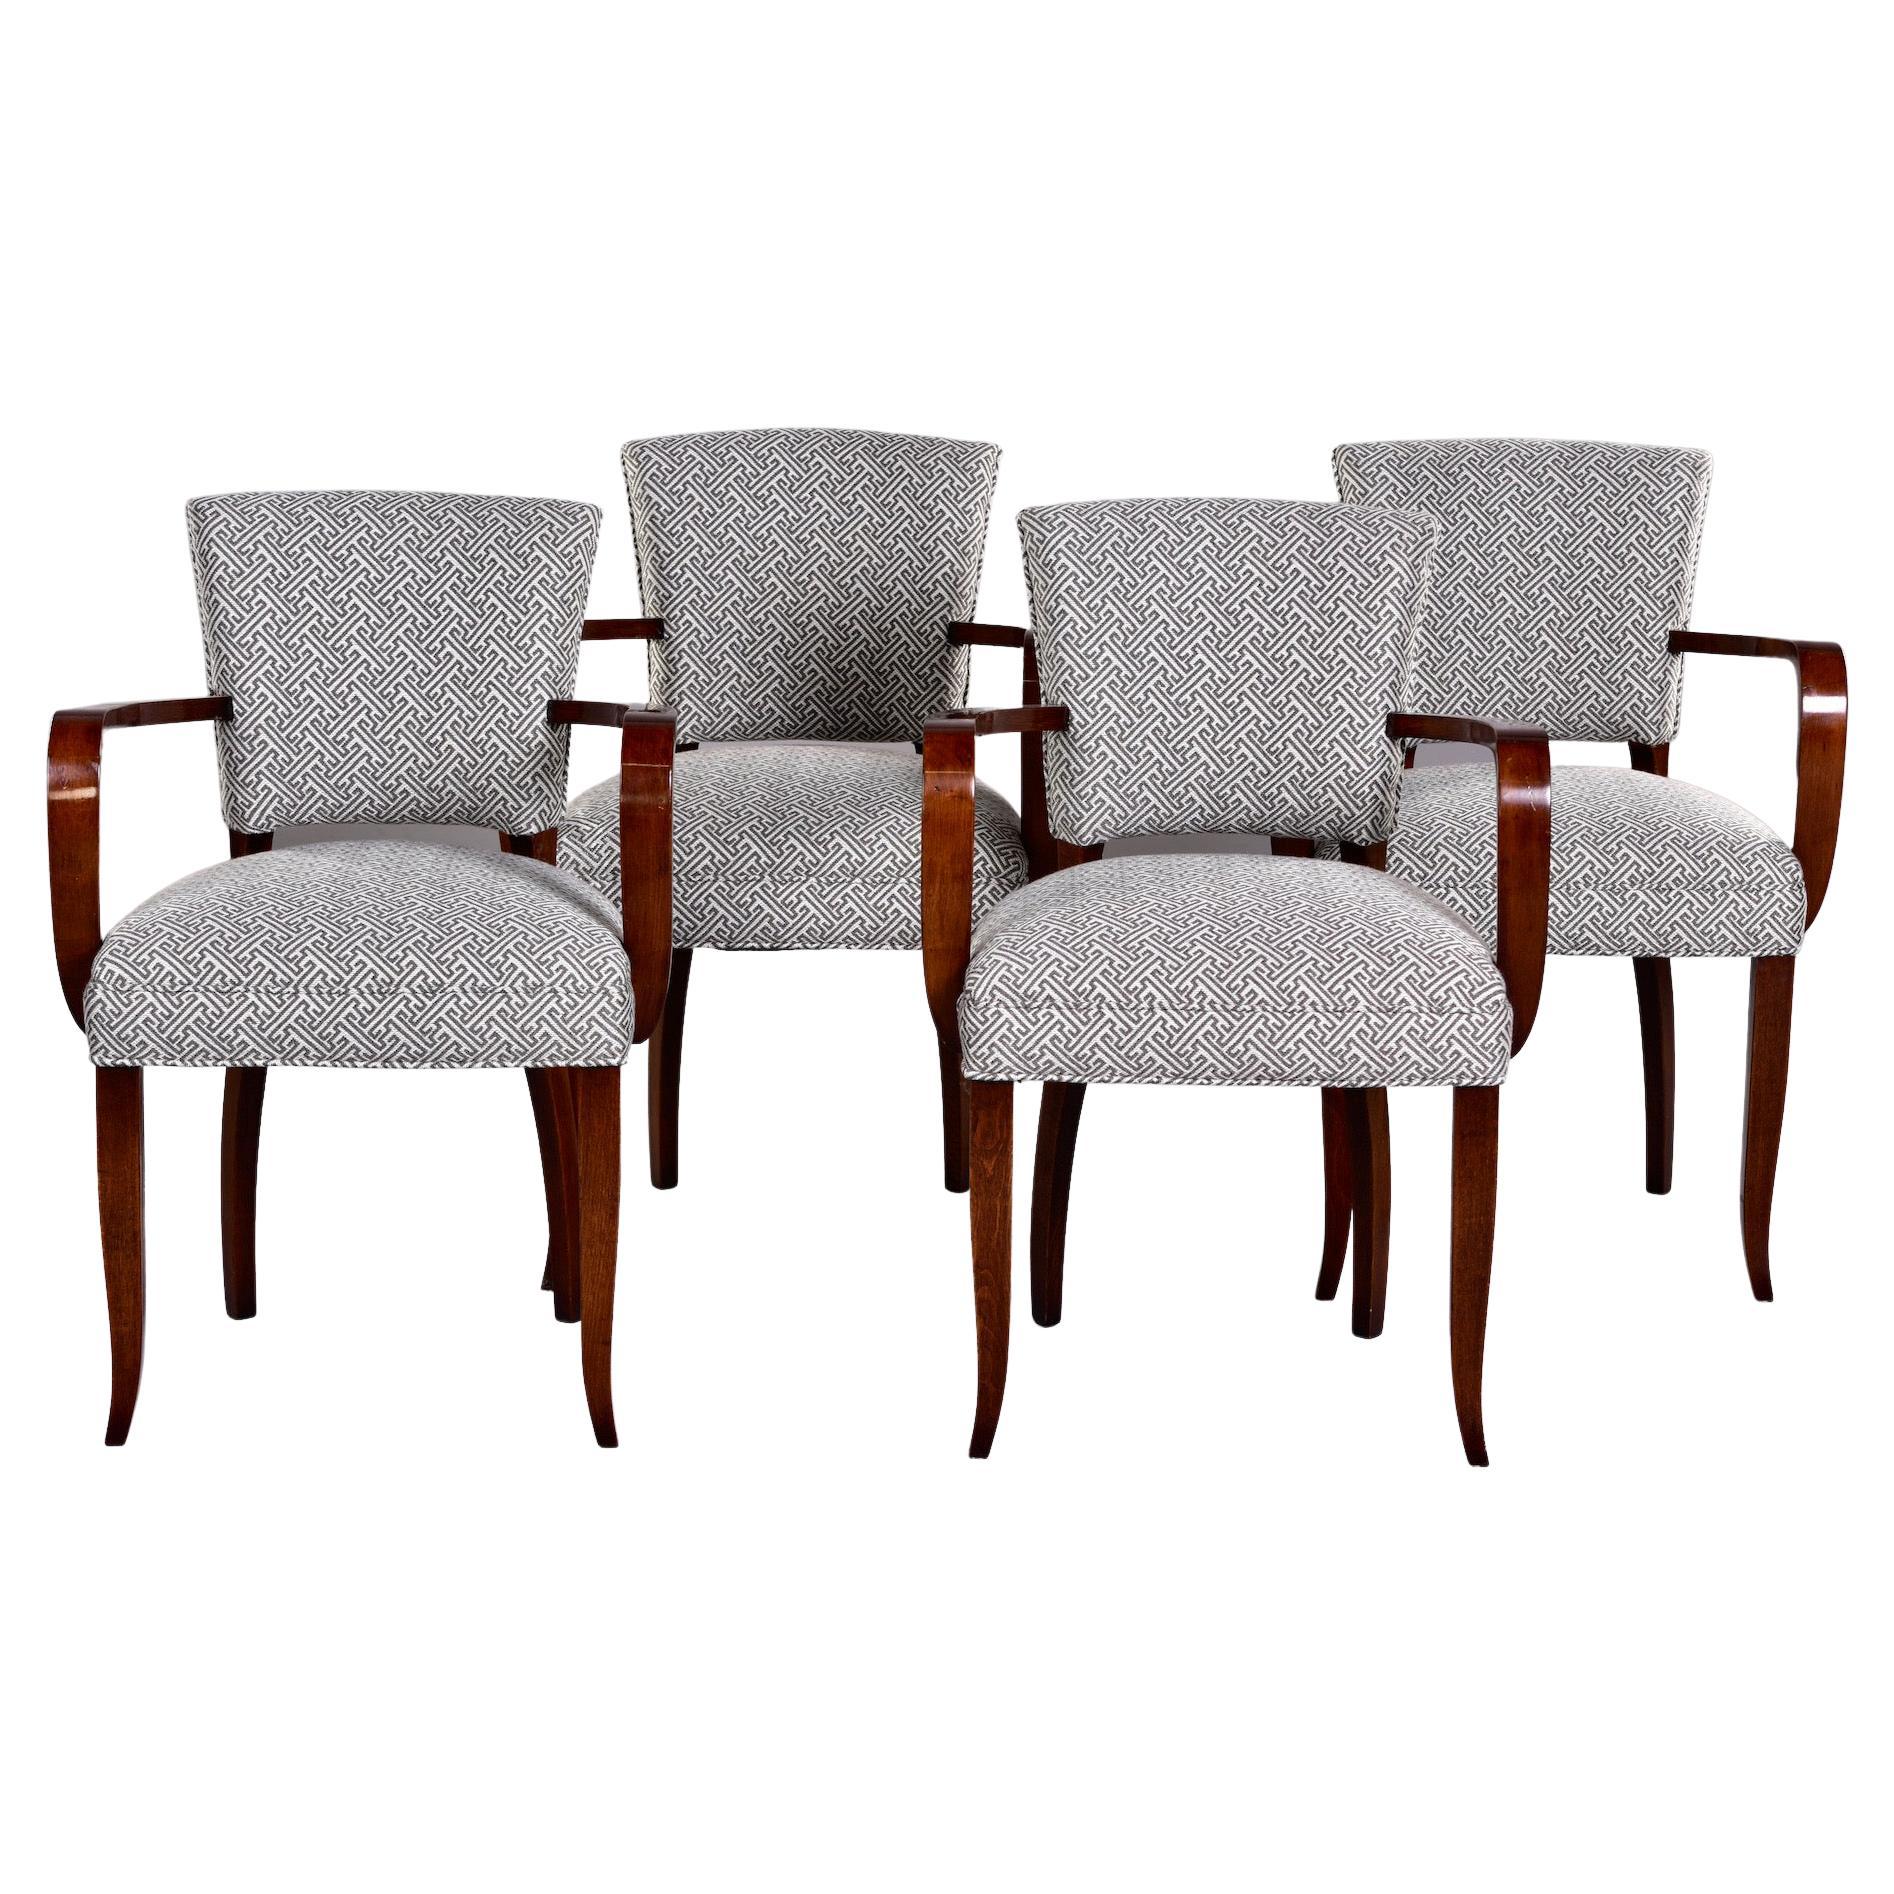 Set Four Mahogany Bridge Chairs with New Upholstery